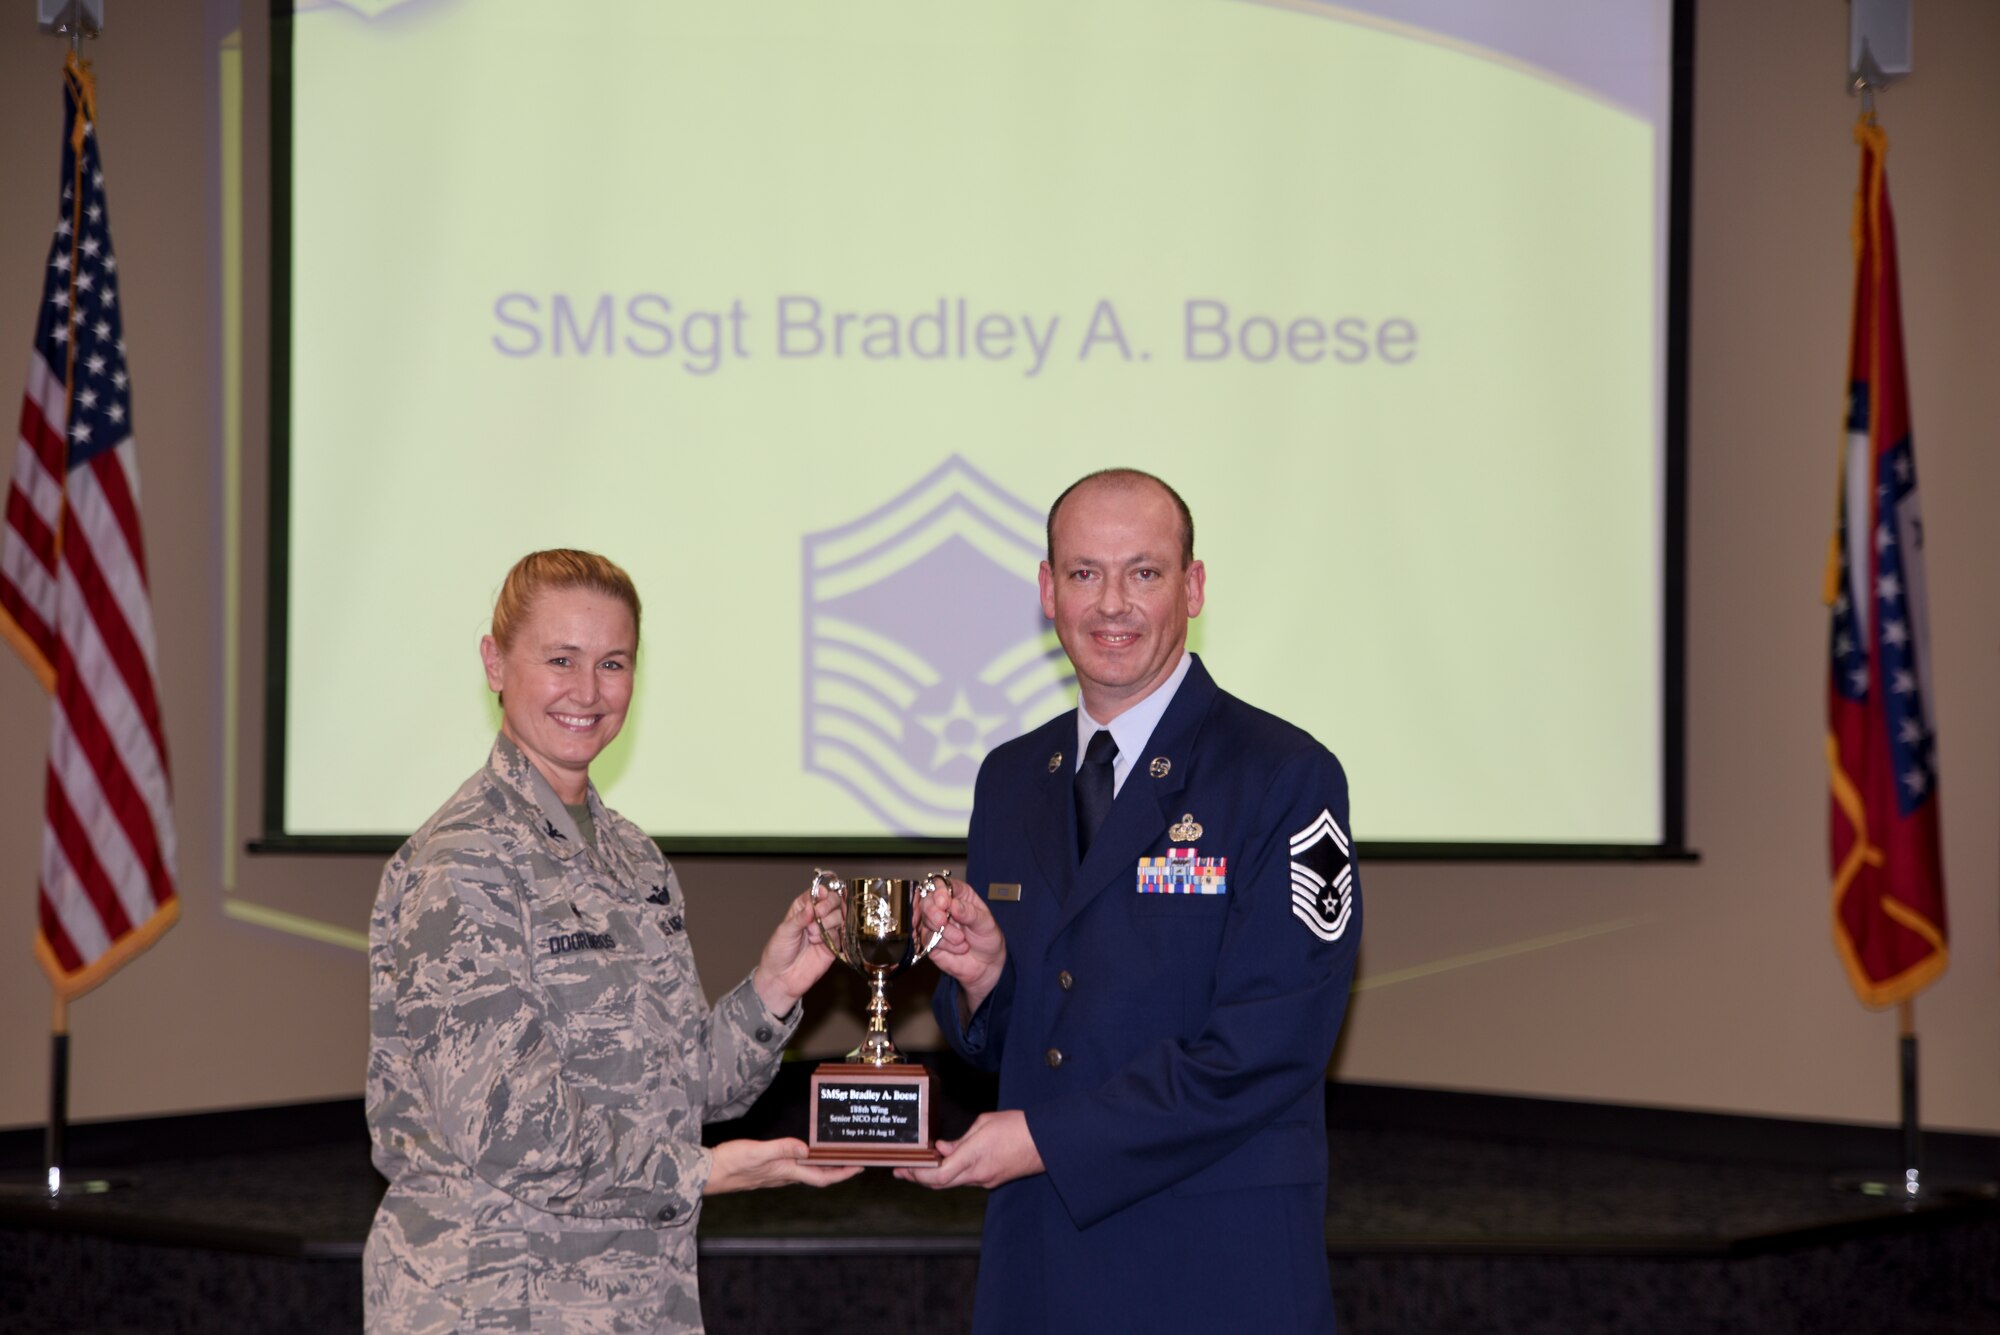 Senior Master Sgt. Bradley Boese receives the award for Outstanding Senior Noncommissioned Officer of the Year from Col. Bobbi Doorenbos, 188th Wing commander. Forty two Outstanding Airmen of the Year nominees were recognized Dec. 5, 2015 during a commander's call for their exceptional service to the wing throughout the last year that distinguished themselves among the best in the 188th. Winners were selected in the Airman, Noncommissioned Officer, Senior NCO, Company Grade Officer and Field Grade Officer categories. (U.S. Air National Guard photo by Capt. Holli Nelson/released)  